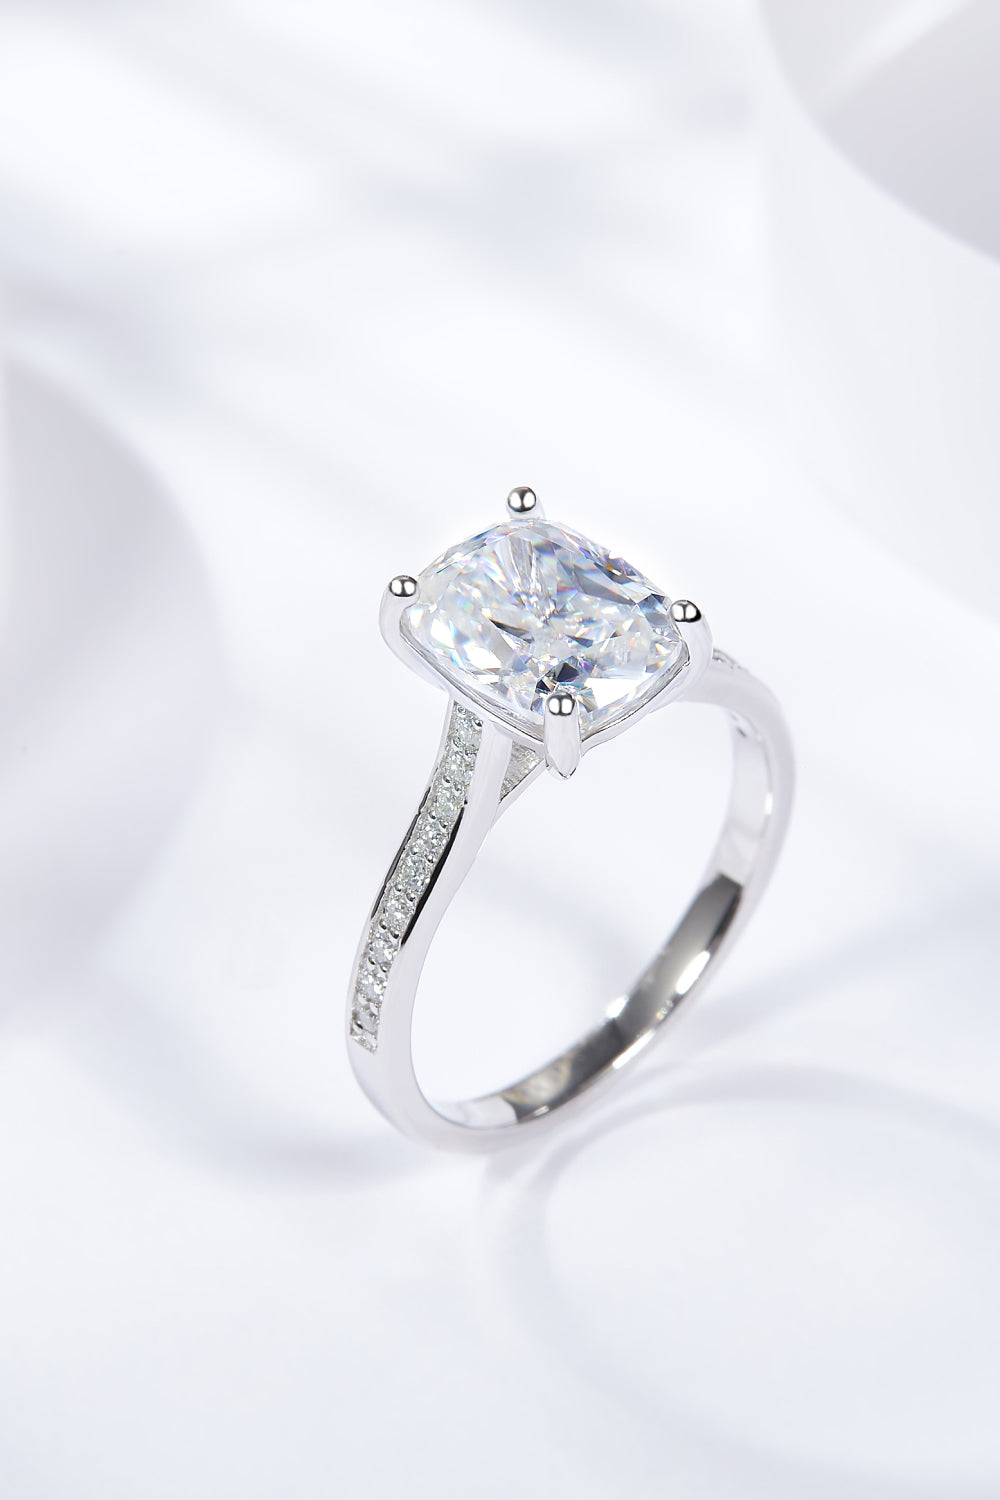 3 Carat Moissanite Platinum-Plated Side Stone Ring Moissanite Jewelry Brides by Emilia Milan 